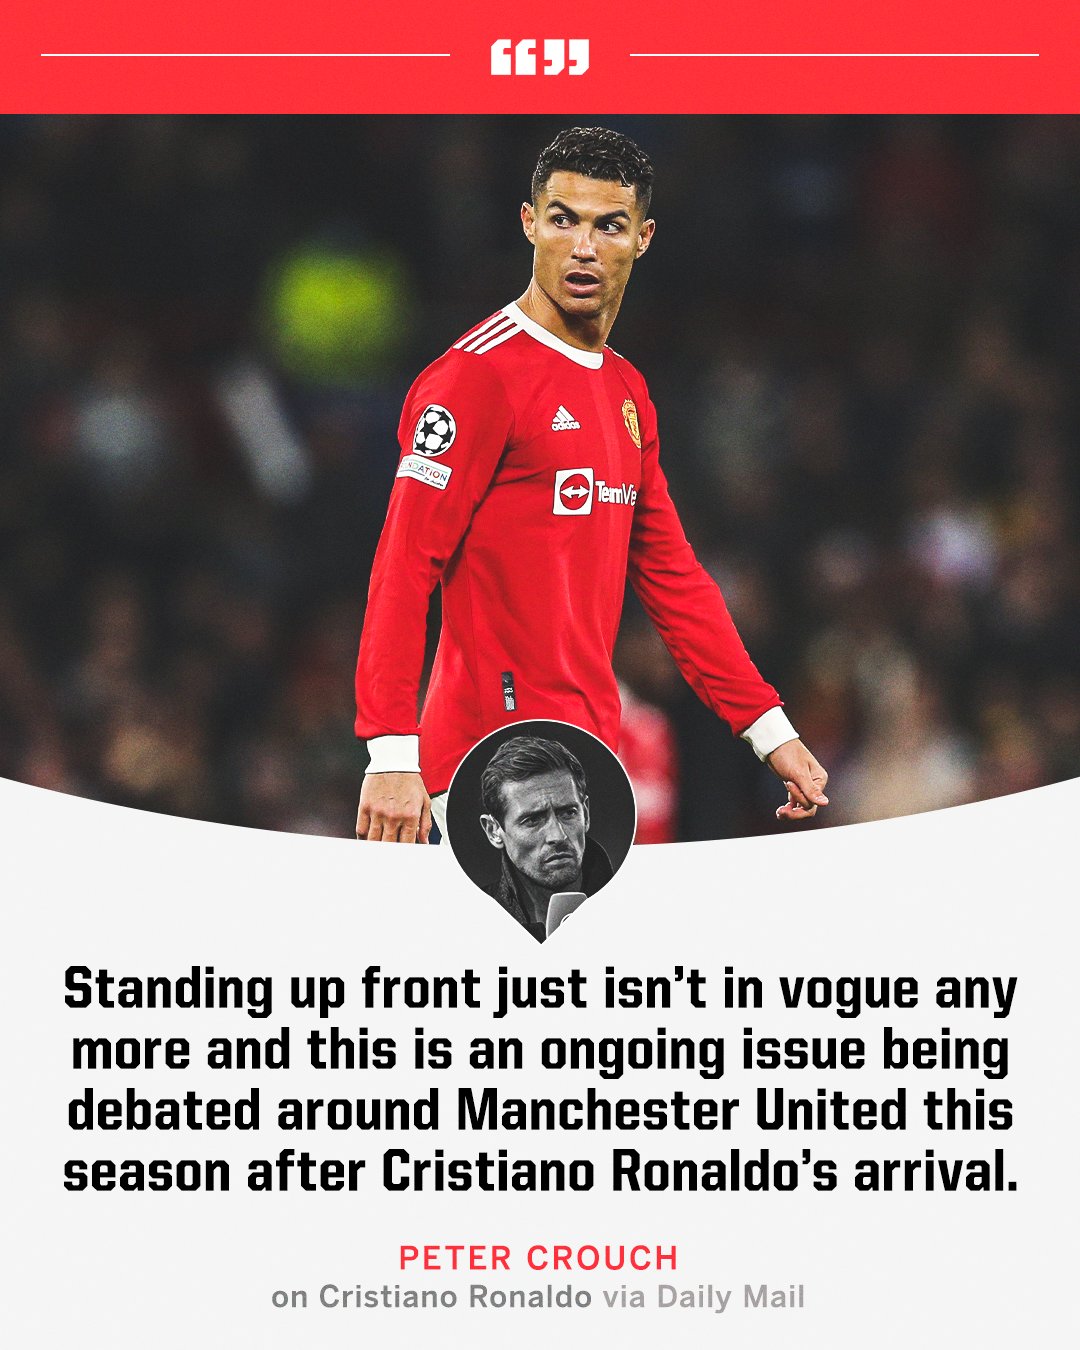 kandidat gennemskueligt Problem ESPN UK on Twitter: "Peter Crouch tells Cristiano Ronaldo standing up front  isn't cool any more 👀 https://t.co/vjCoBfxrS7" / Twitter